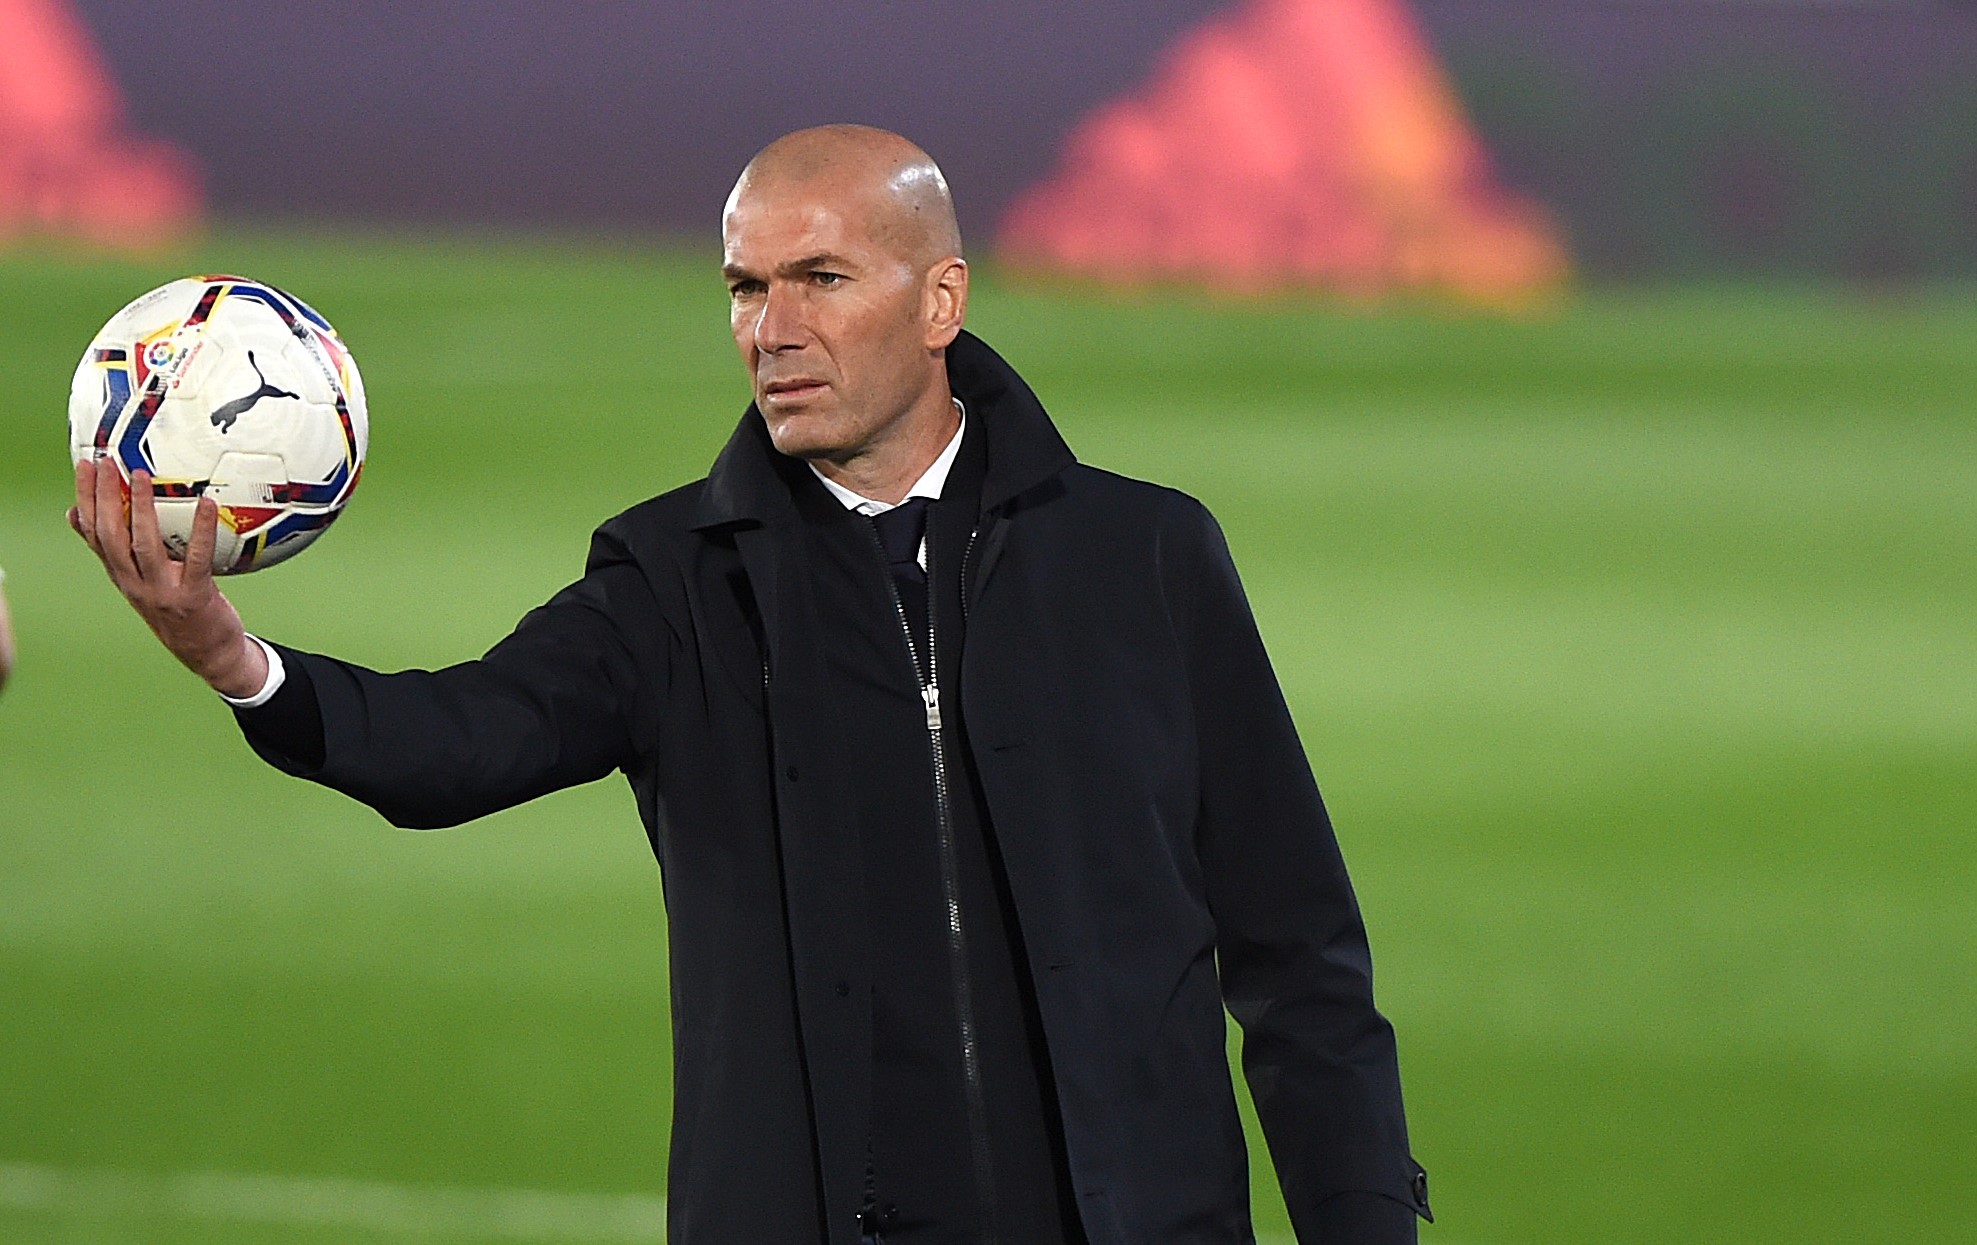 Zinedine Zidane demands two signings as part of PSG package